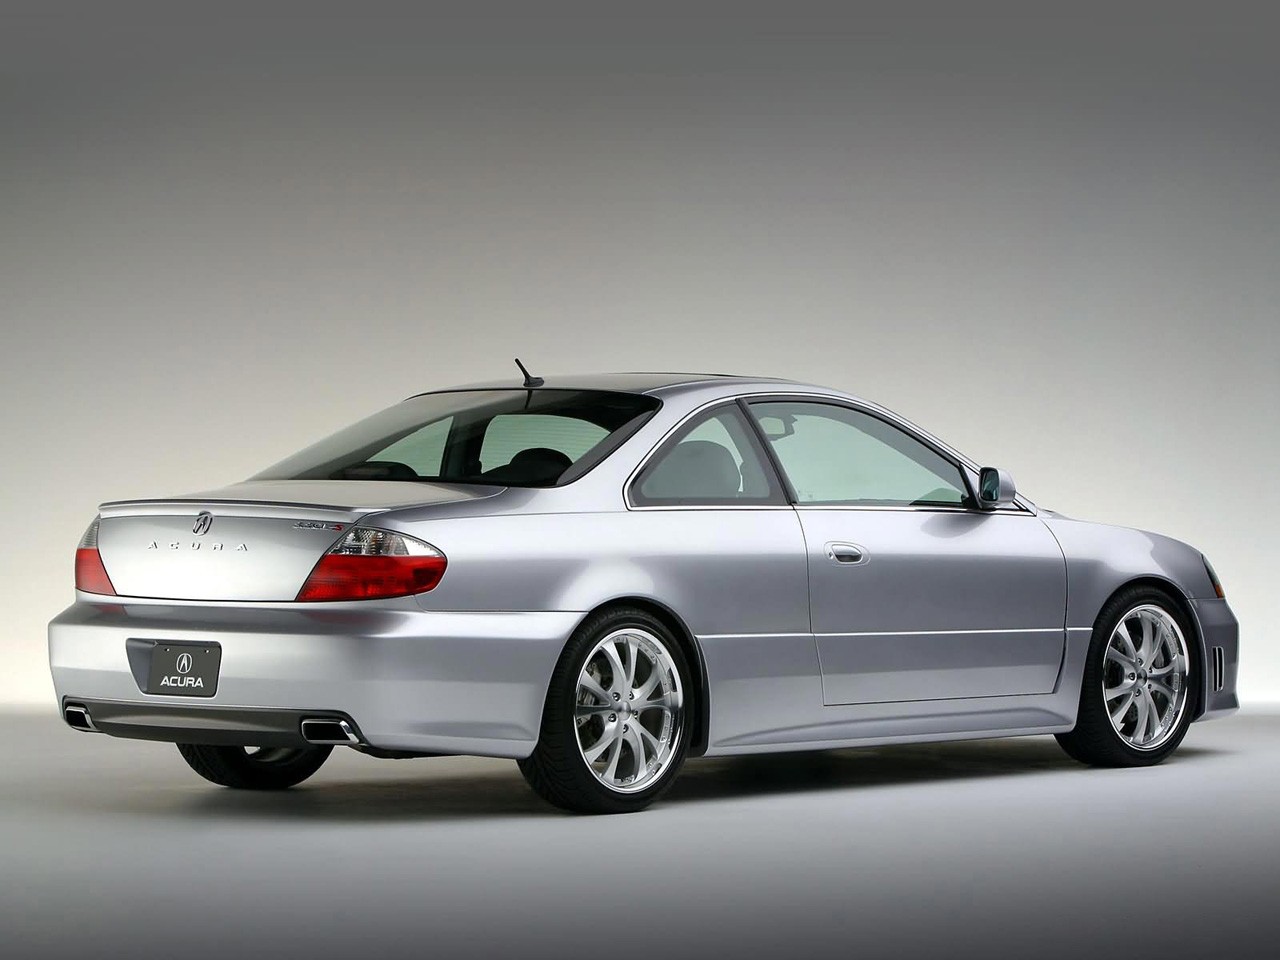 Acura Cl 1997- 2003 Motorpedia ALL models, history and specifications